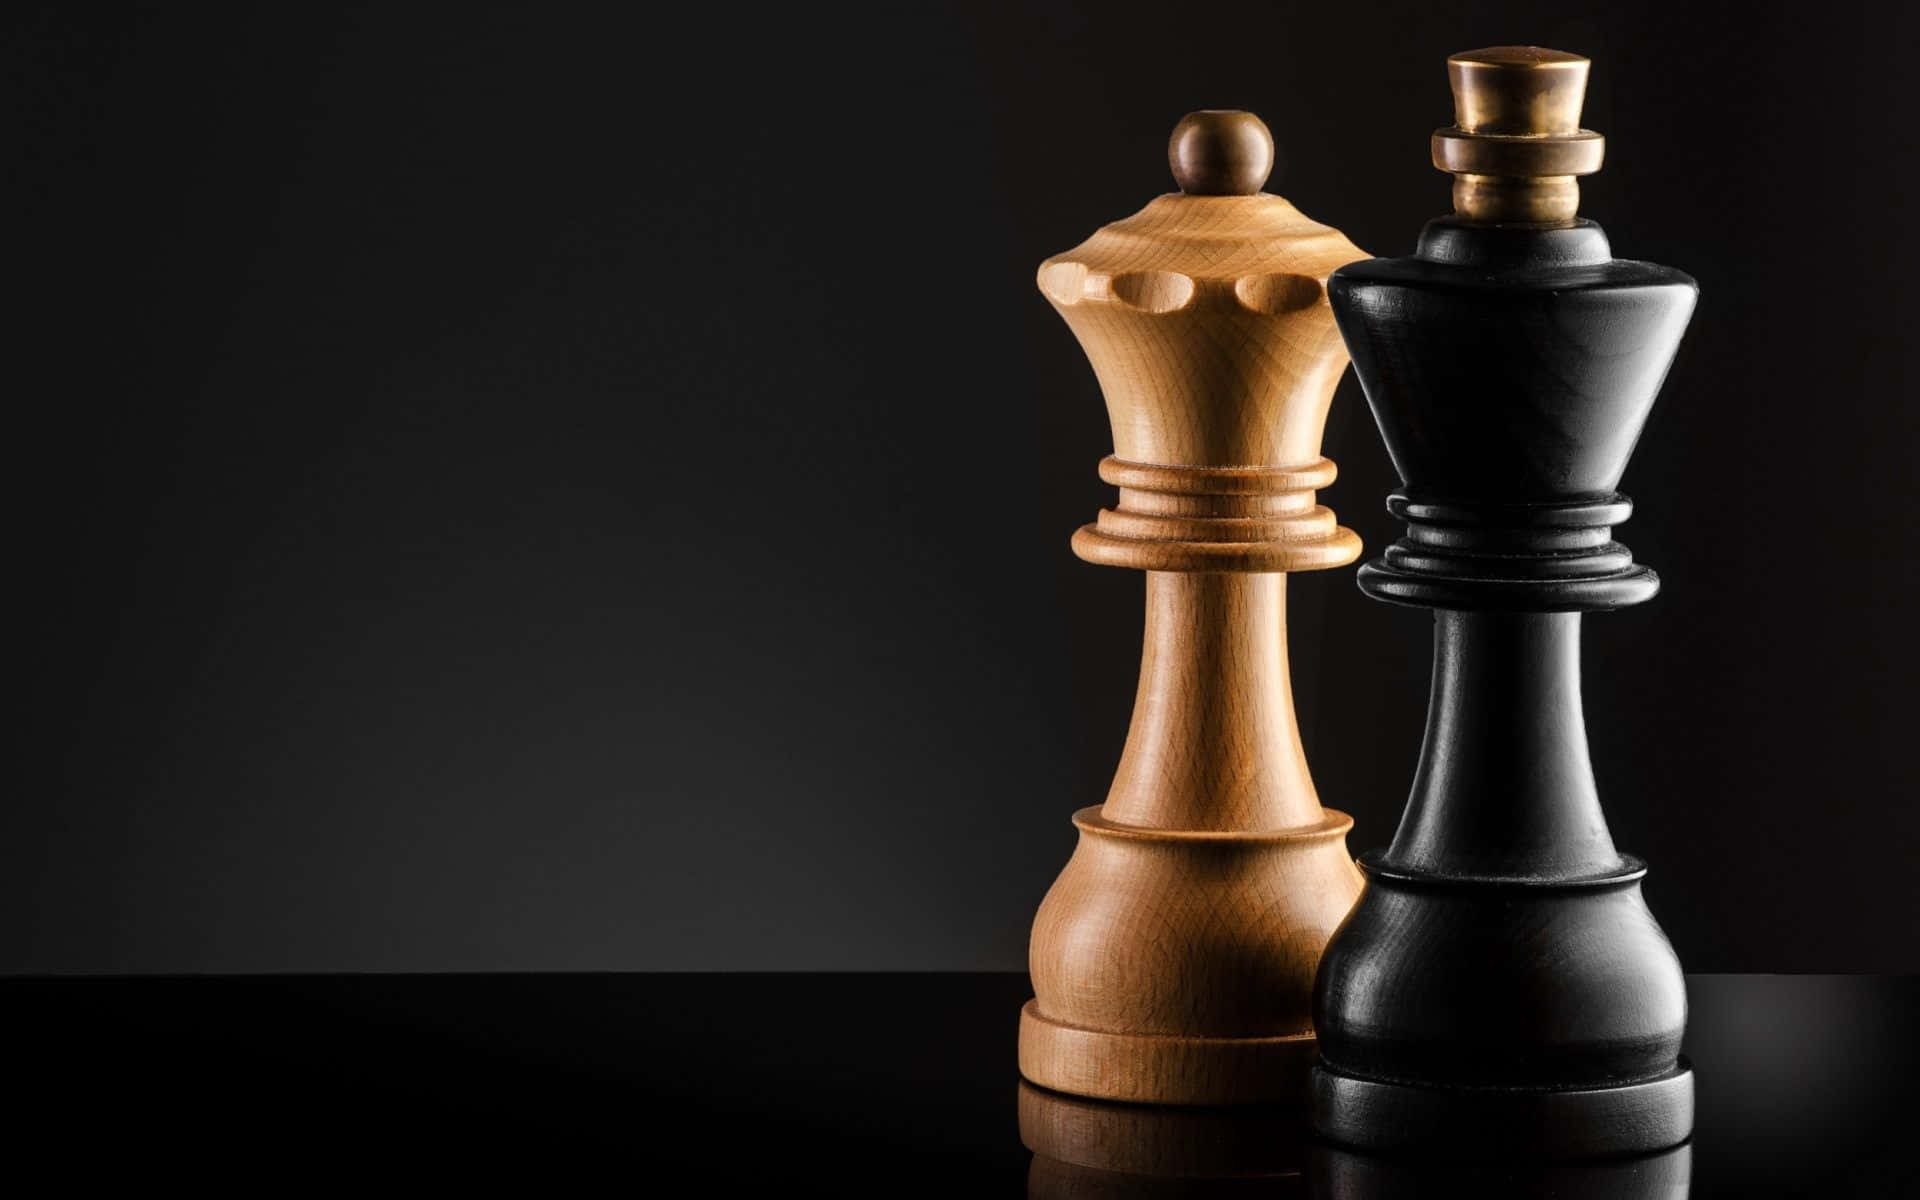 "Chess: A Timeless and Classic Board Game"